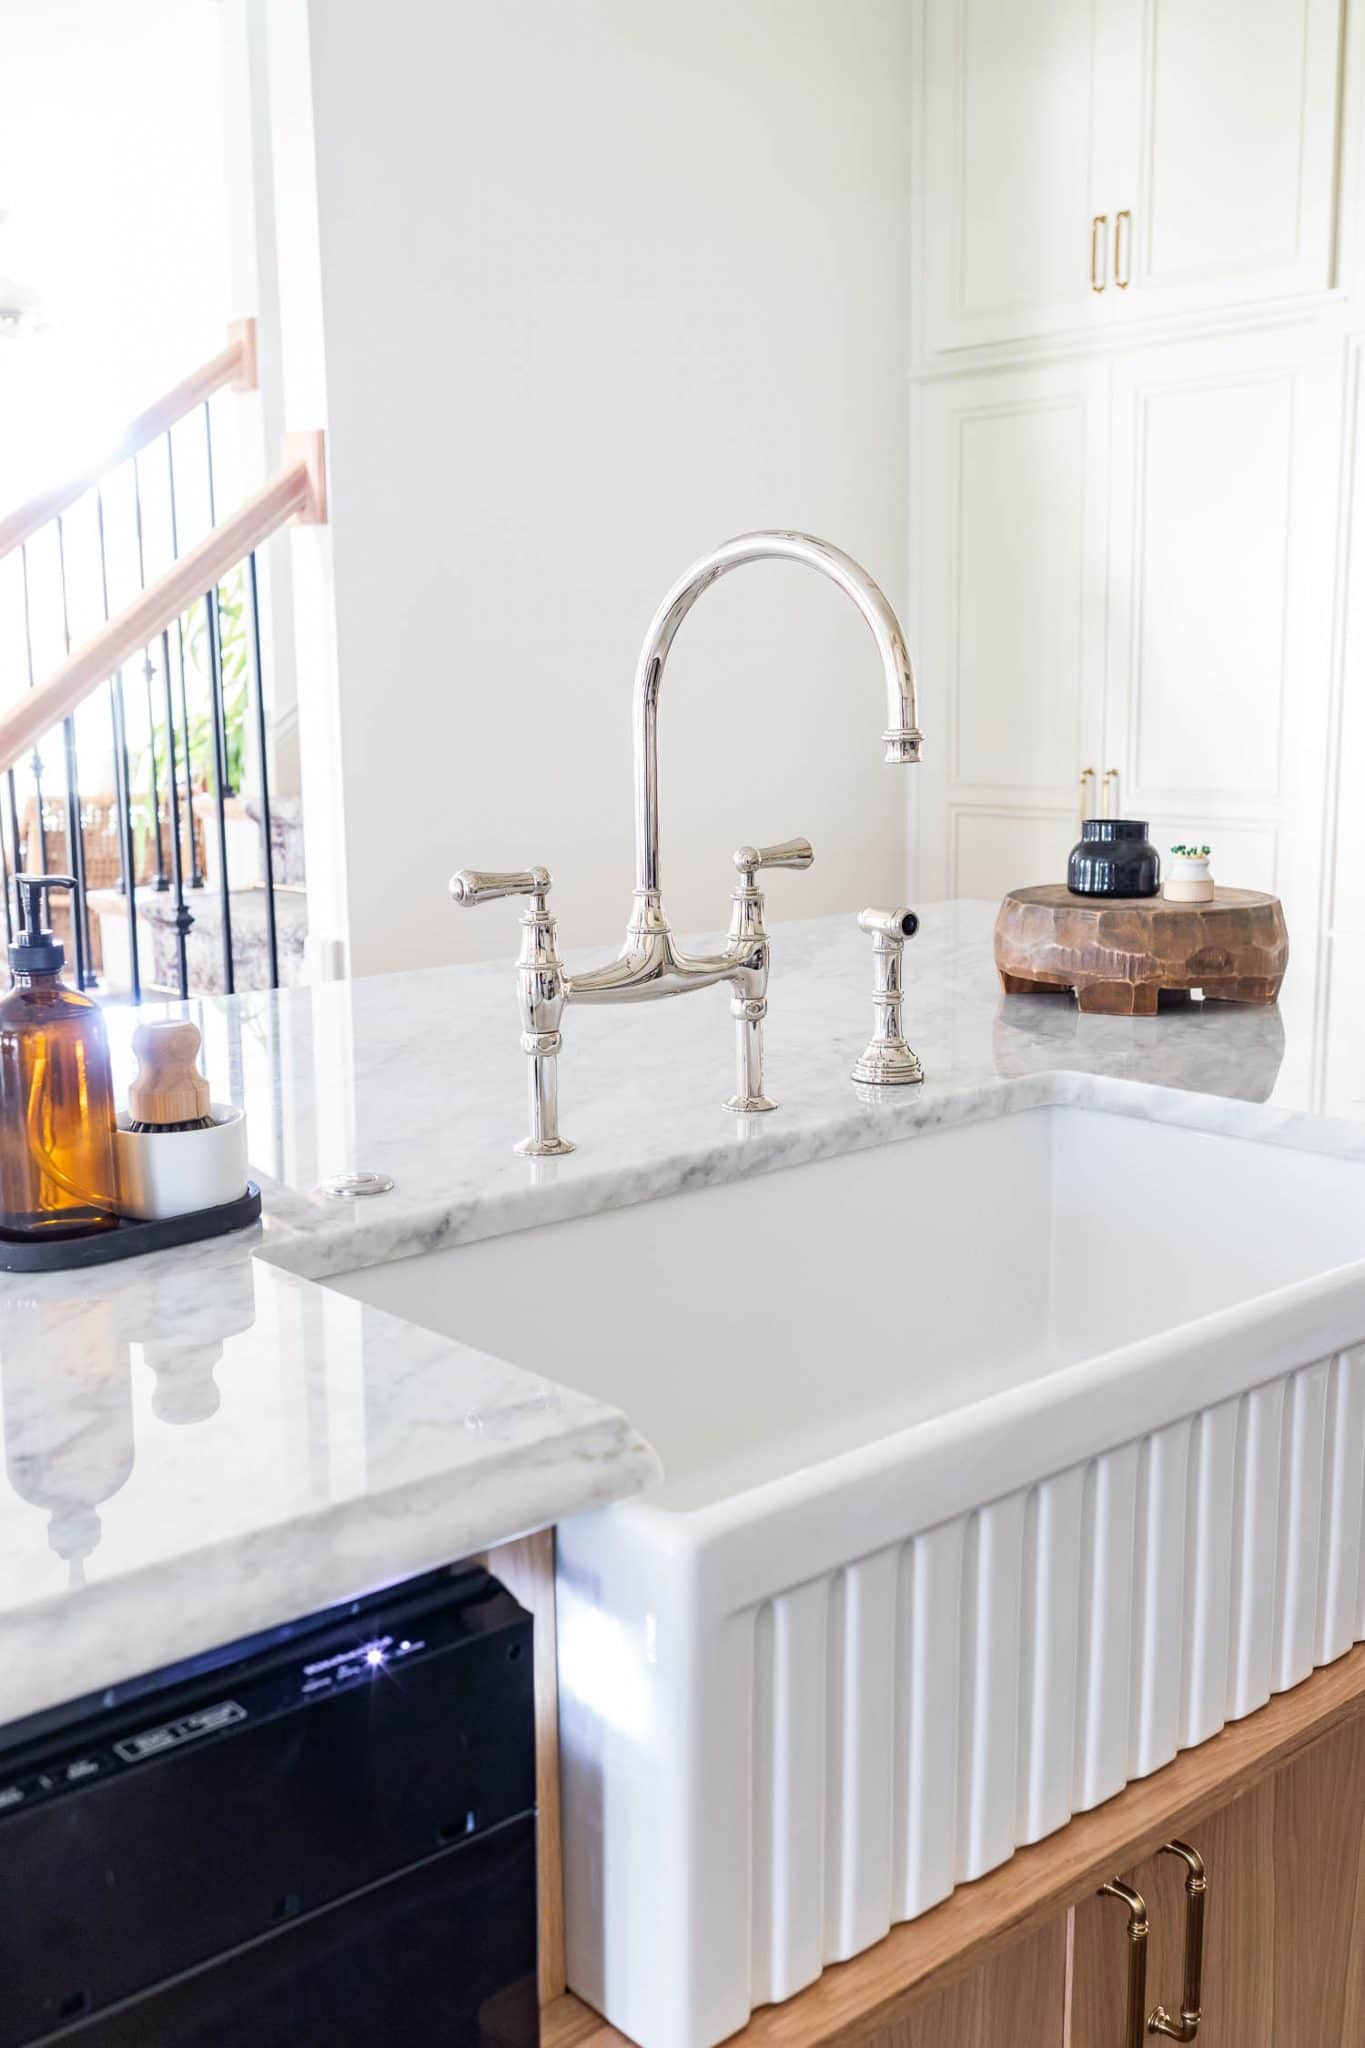 Our Beautiful New Bridge Faucet And